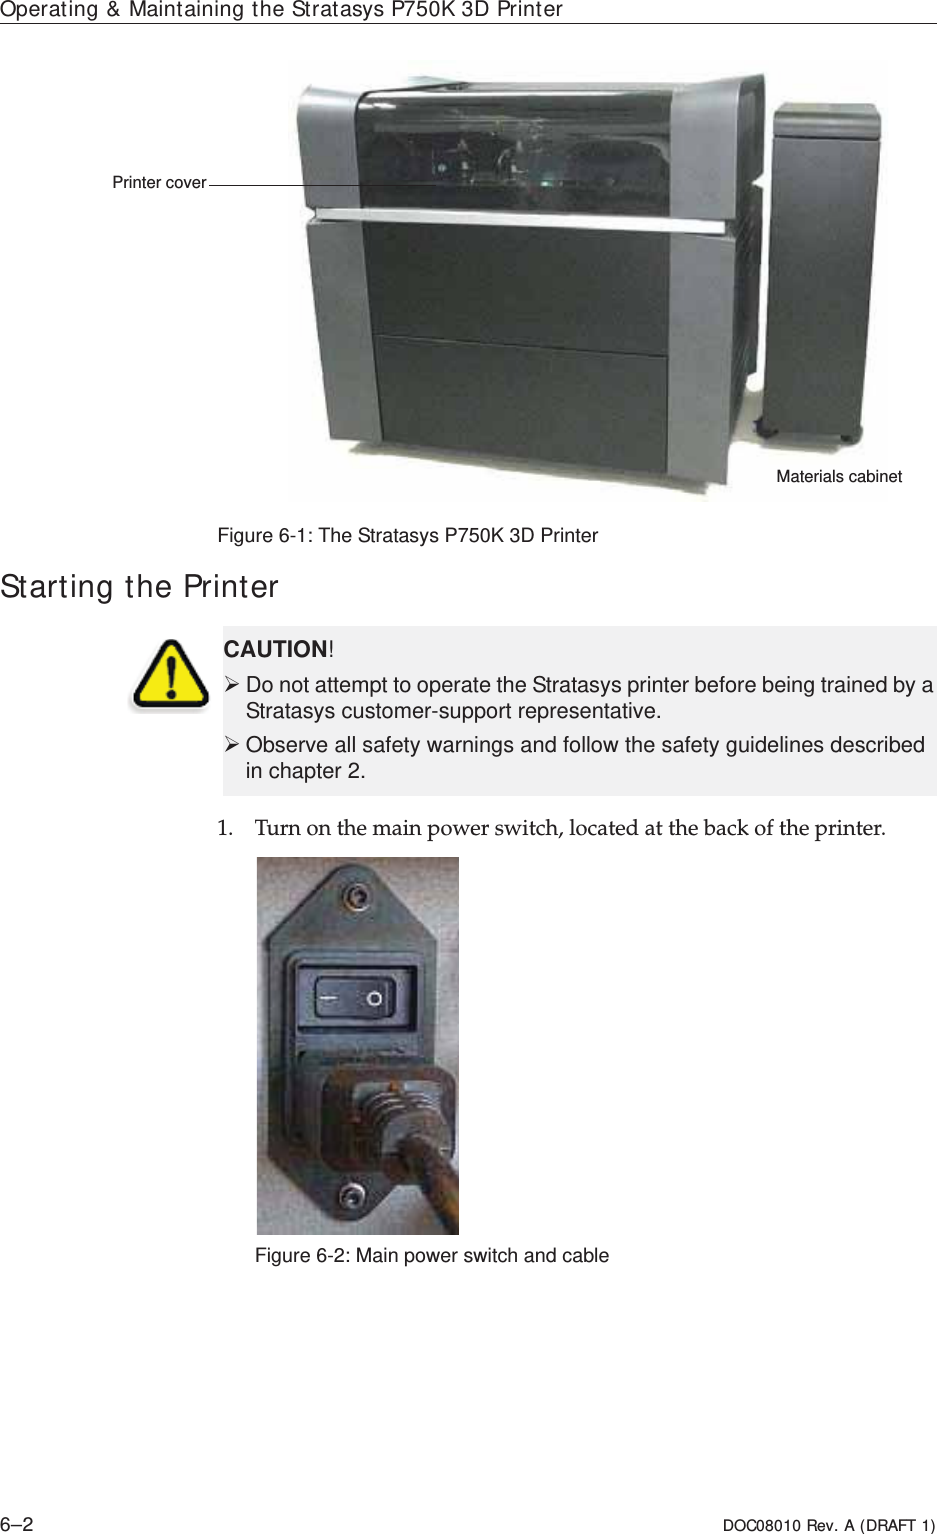 Operating &amp; Maintaining the Stratasys P750K 3D Printer6–2 DOC08010 Rev. A (DRAFT 1)Figure 6-1: The Stratasys P750K 3D Printer Starting the Printer1. Turnȱonȱtheȱmainȱpowerȱswitch,ȱlocatedȱatȱtheȱbackȱofȱtheȱprinter.Figure 6-2: Main power switch and cablePrinter coverMaterials cabinetCAUTION!¾Do not attempt to operate the Stratasys printer before being trained by a Stratasys customer-support representative.¾Observe all safety warnings and follow the safety guidelines described in chapter 2.